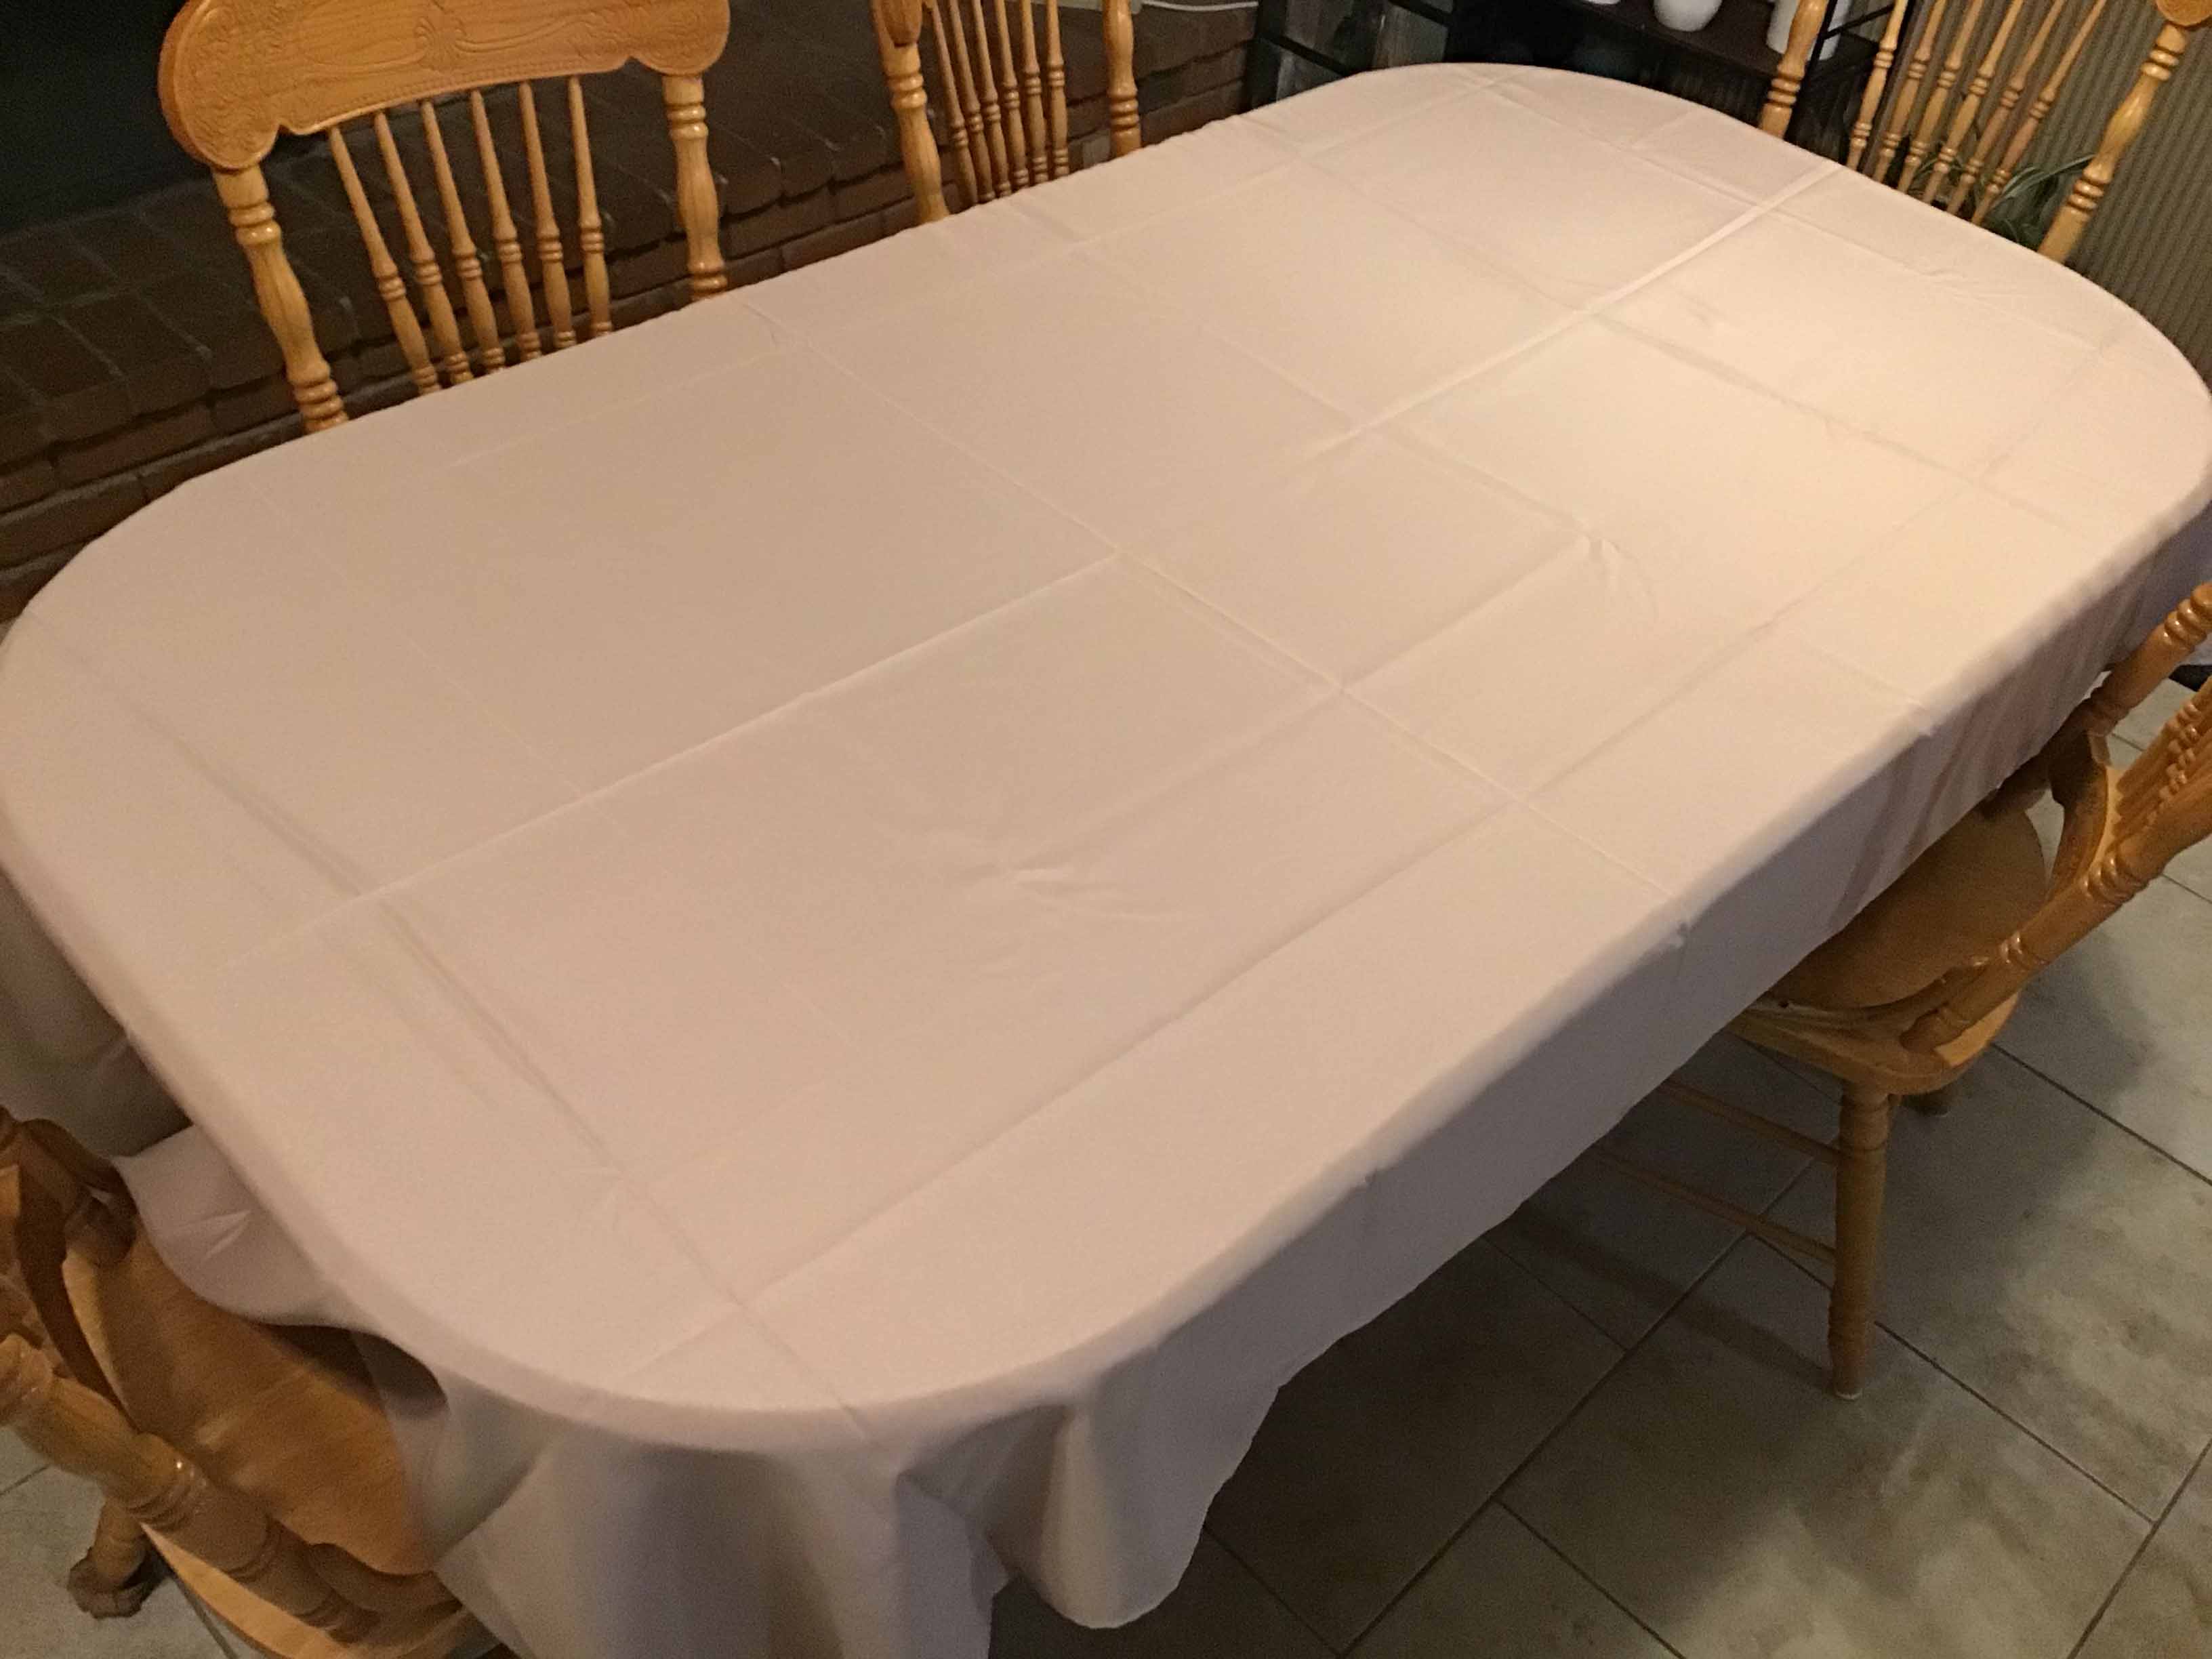 rectangle tablecloths (nude) - 60 x 102